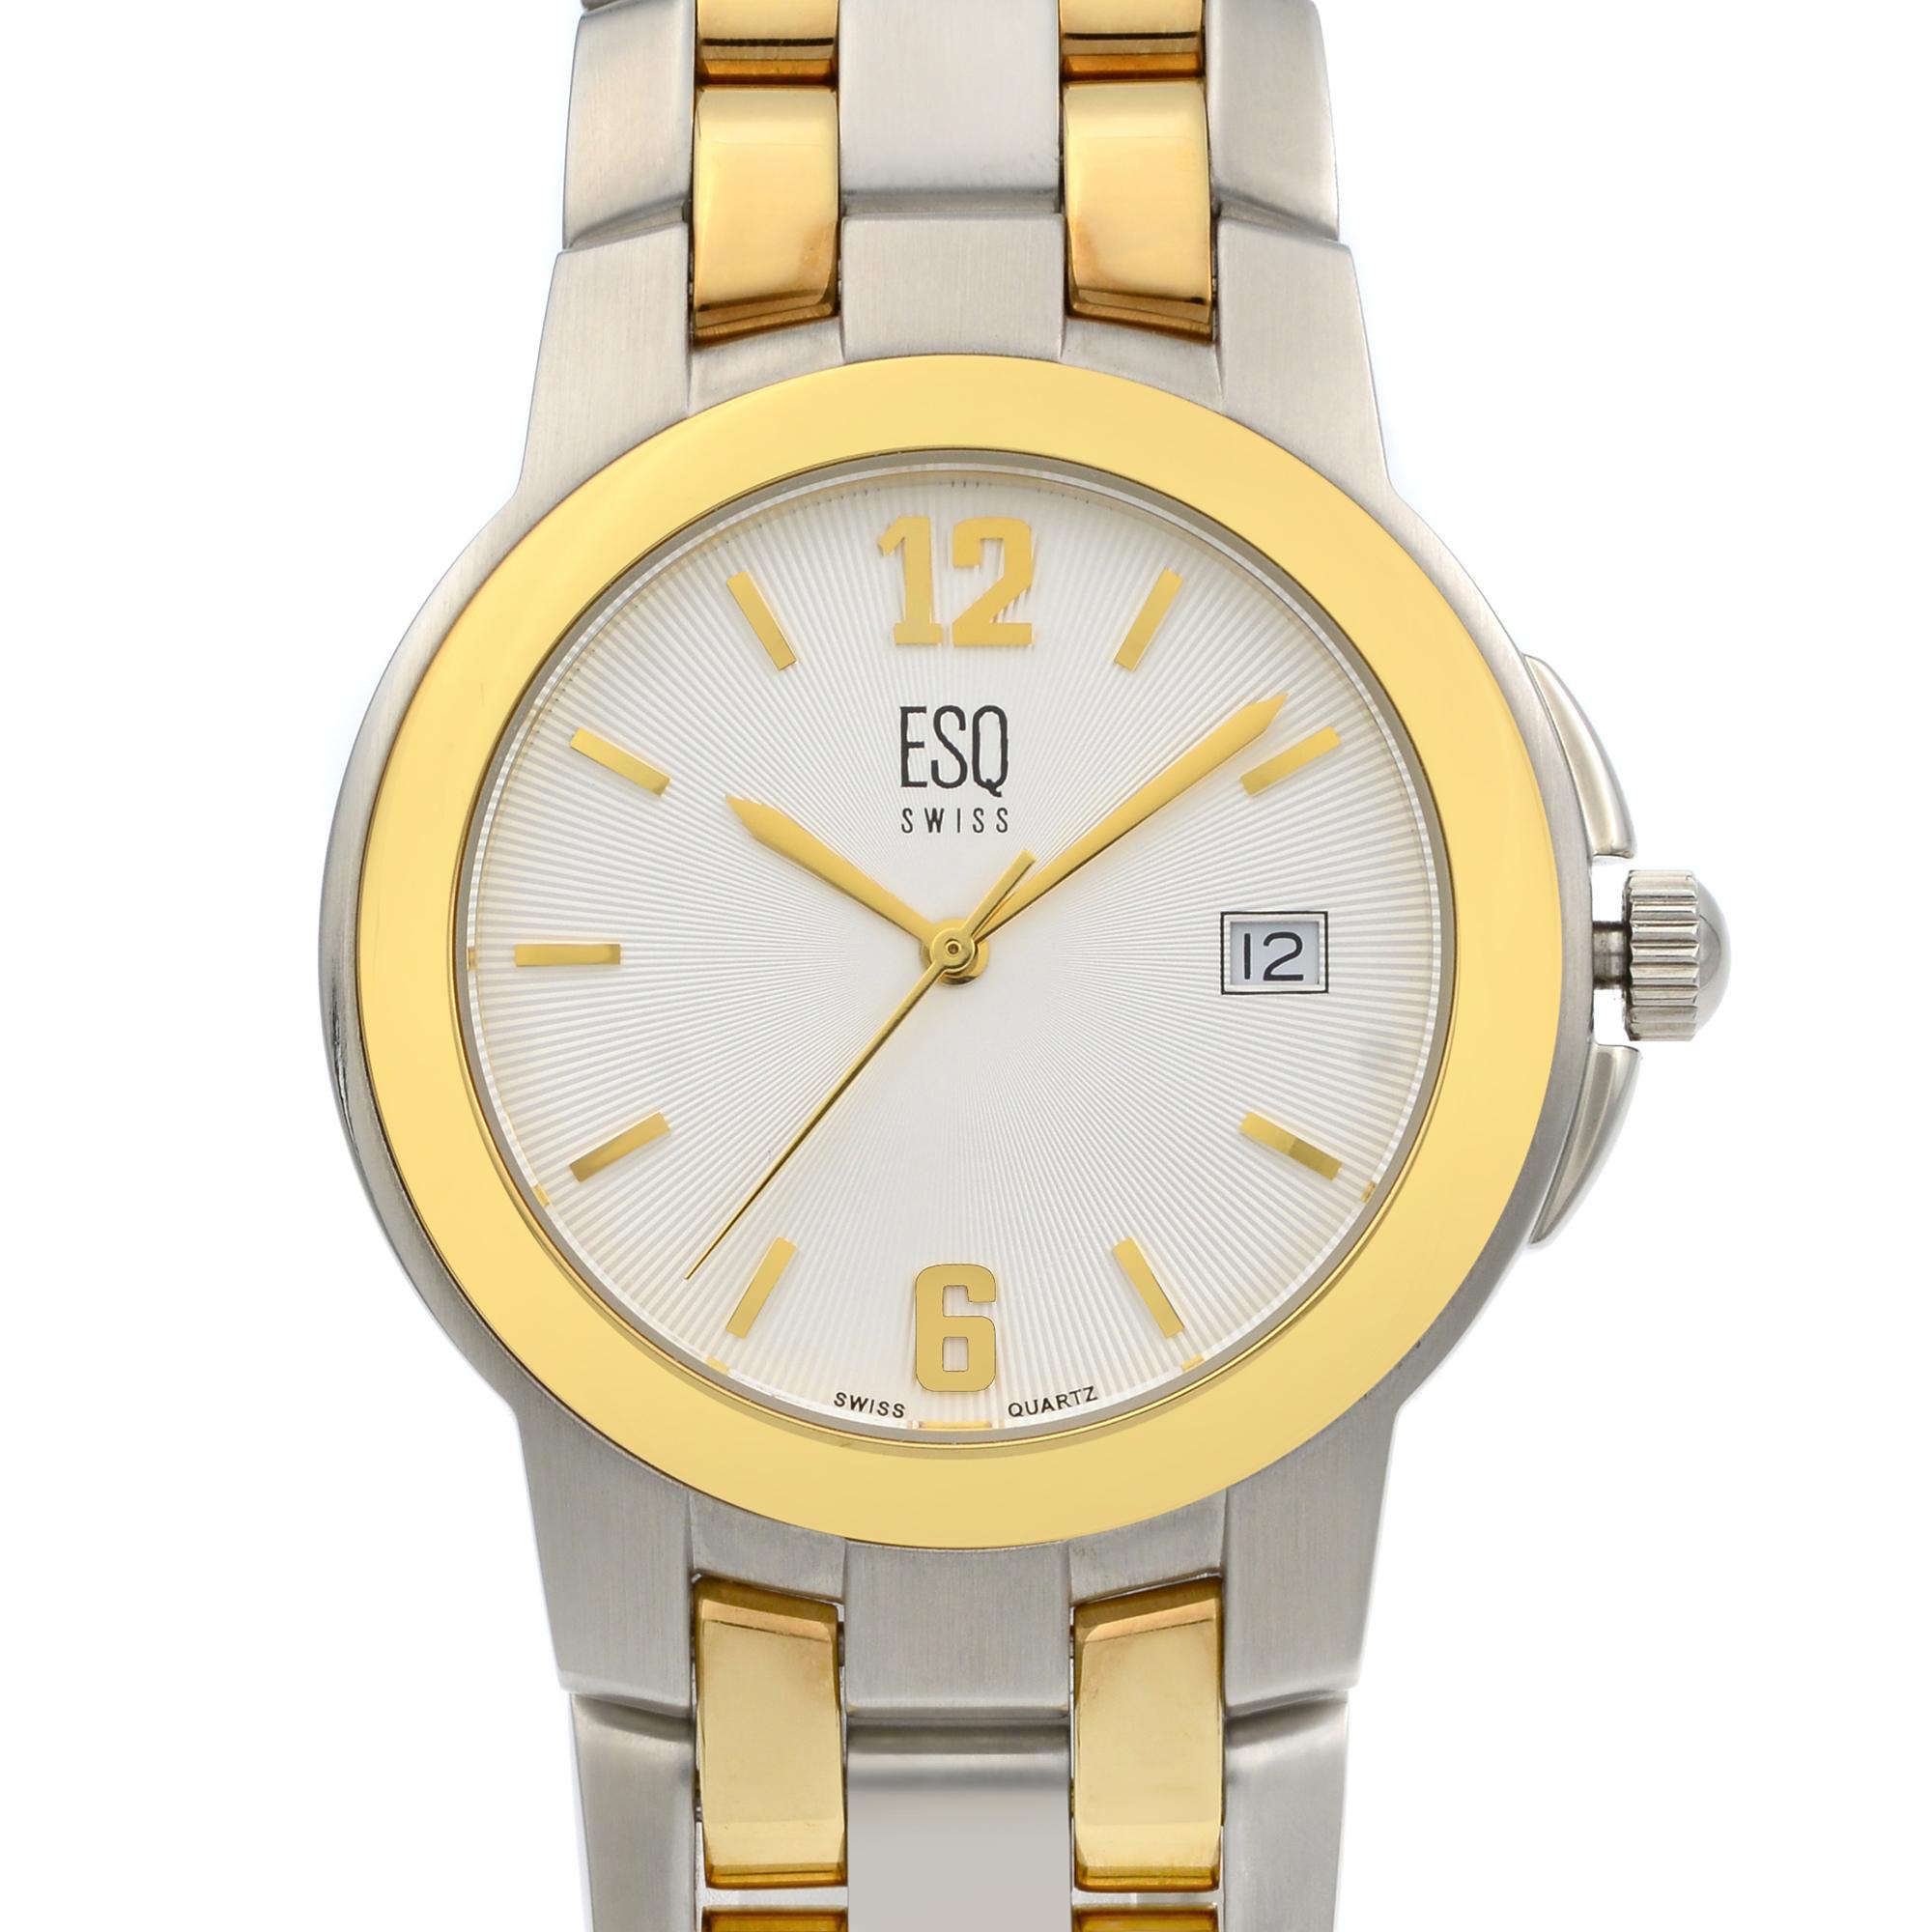 ESQ Swiss Two-Tone Steel Silver Sunray Dial Quartz Mens Dress Watch 07300747. This Beautiful Timepiece is Powered by a Quartz (Battery) Movement and Features: a Silver-Tone Steel Case and a Two-Tone Steel Bracelet, Fixed Gold-Tone Bezel, White Dial